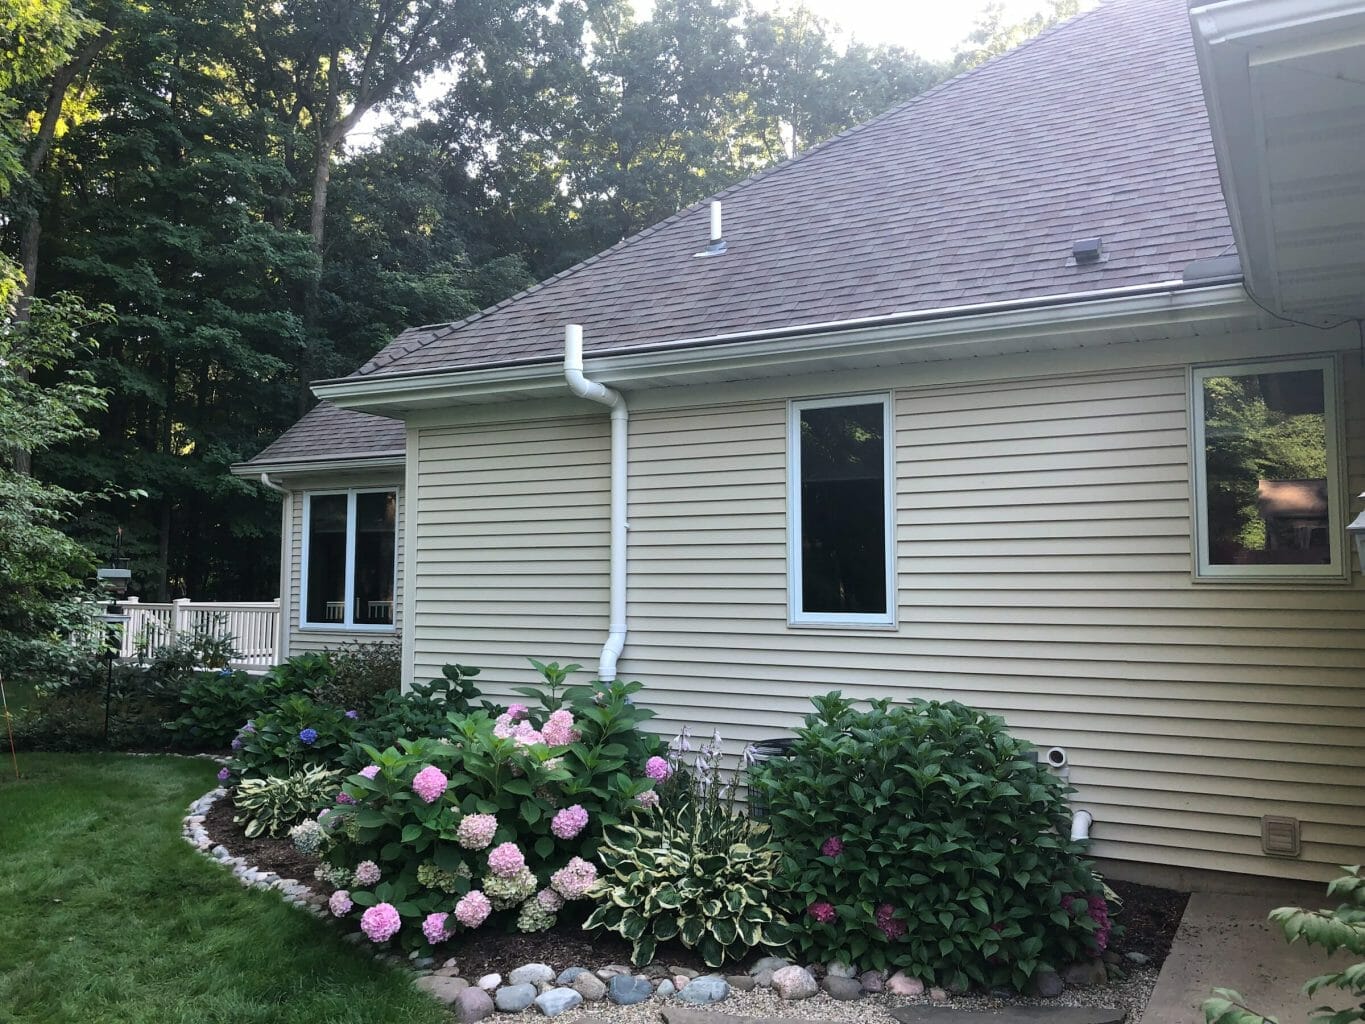 A photo of a radon mitigation system installed on a home's exterior.